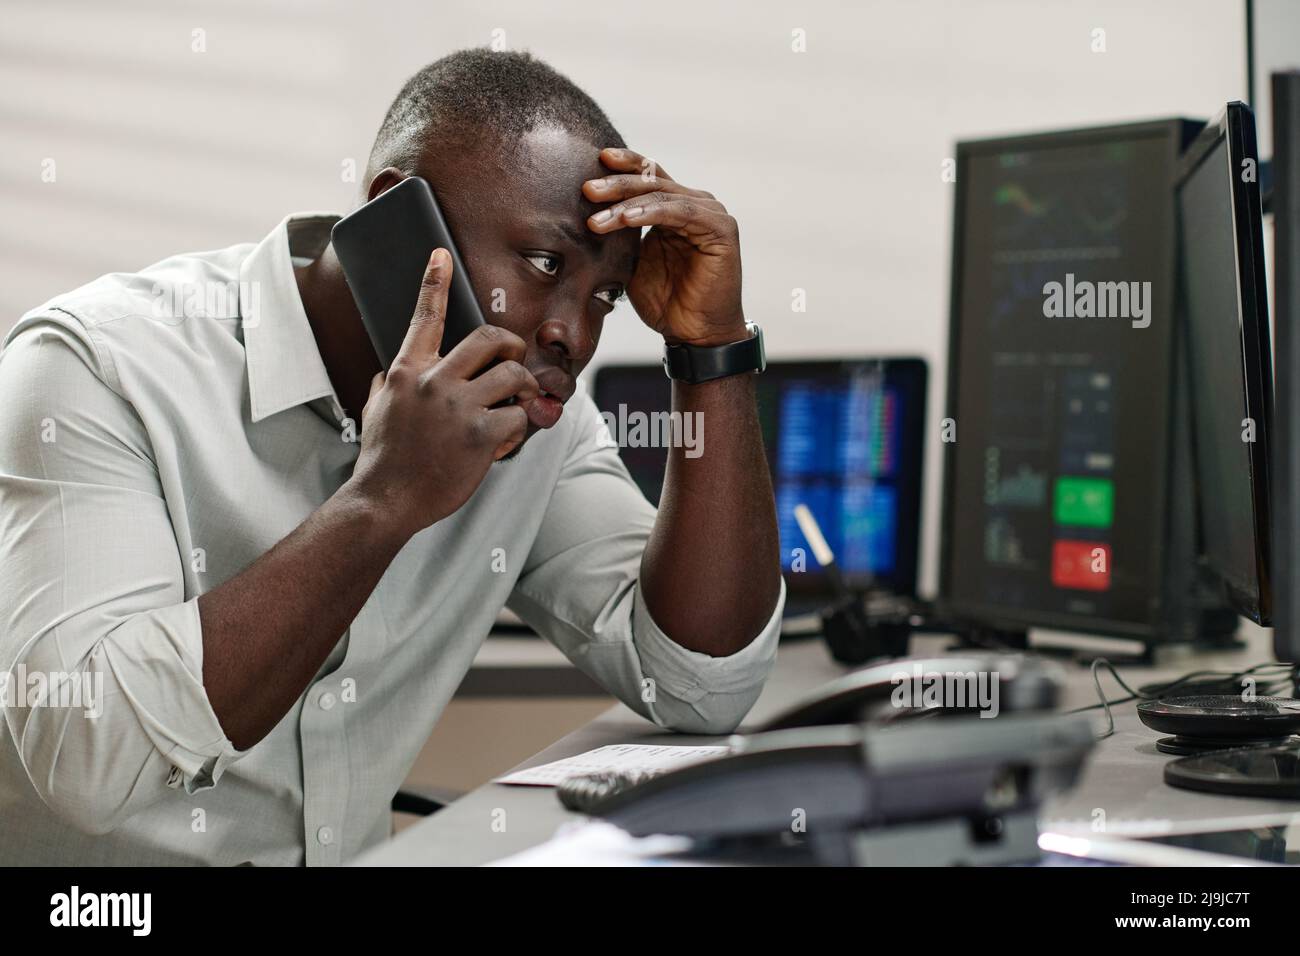 Young Black man working with in stock trading industry feeling stressed out talking to dissatisfied client Stock Photo